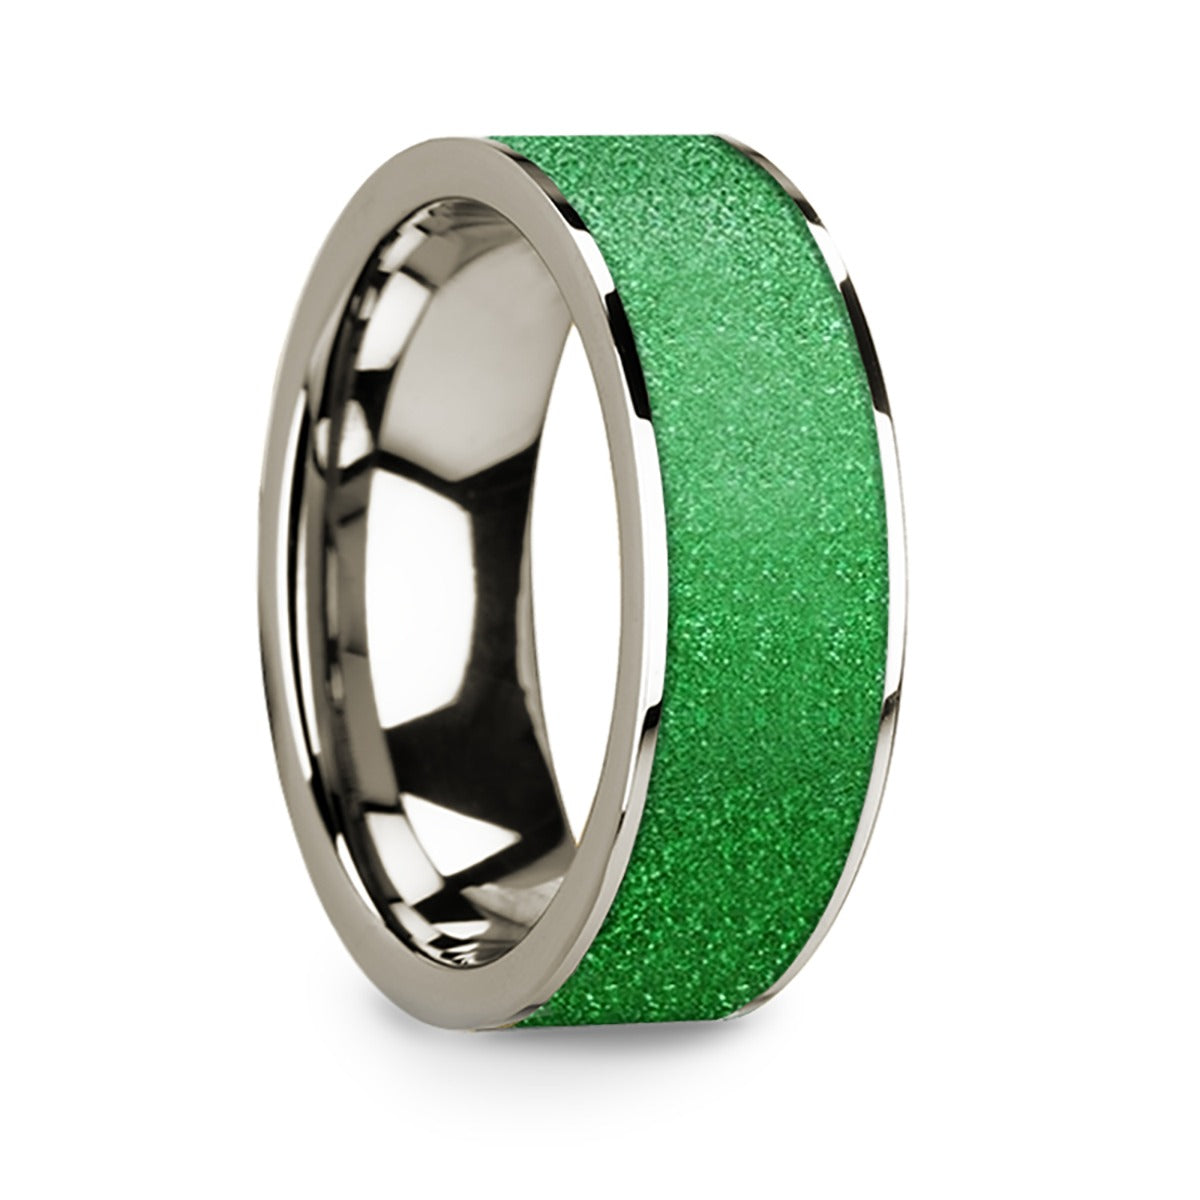 14k White Gold Men's Wedding Band with Textured Green Inlay